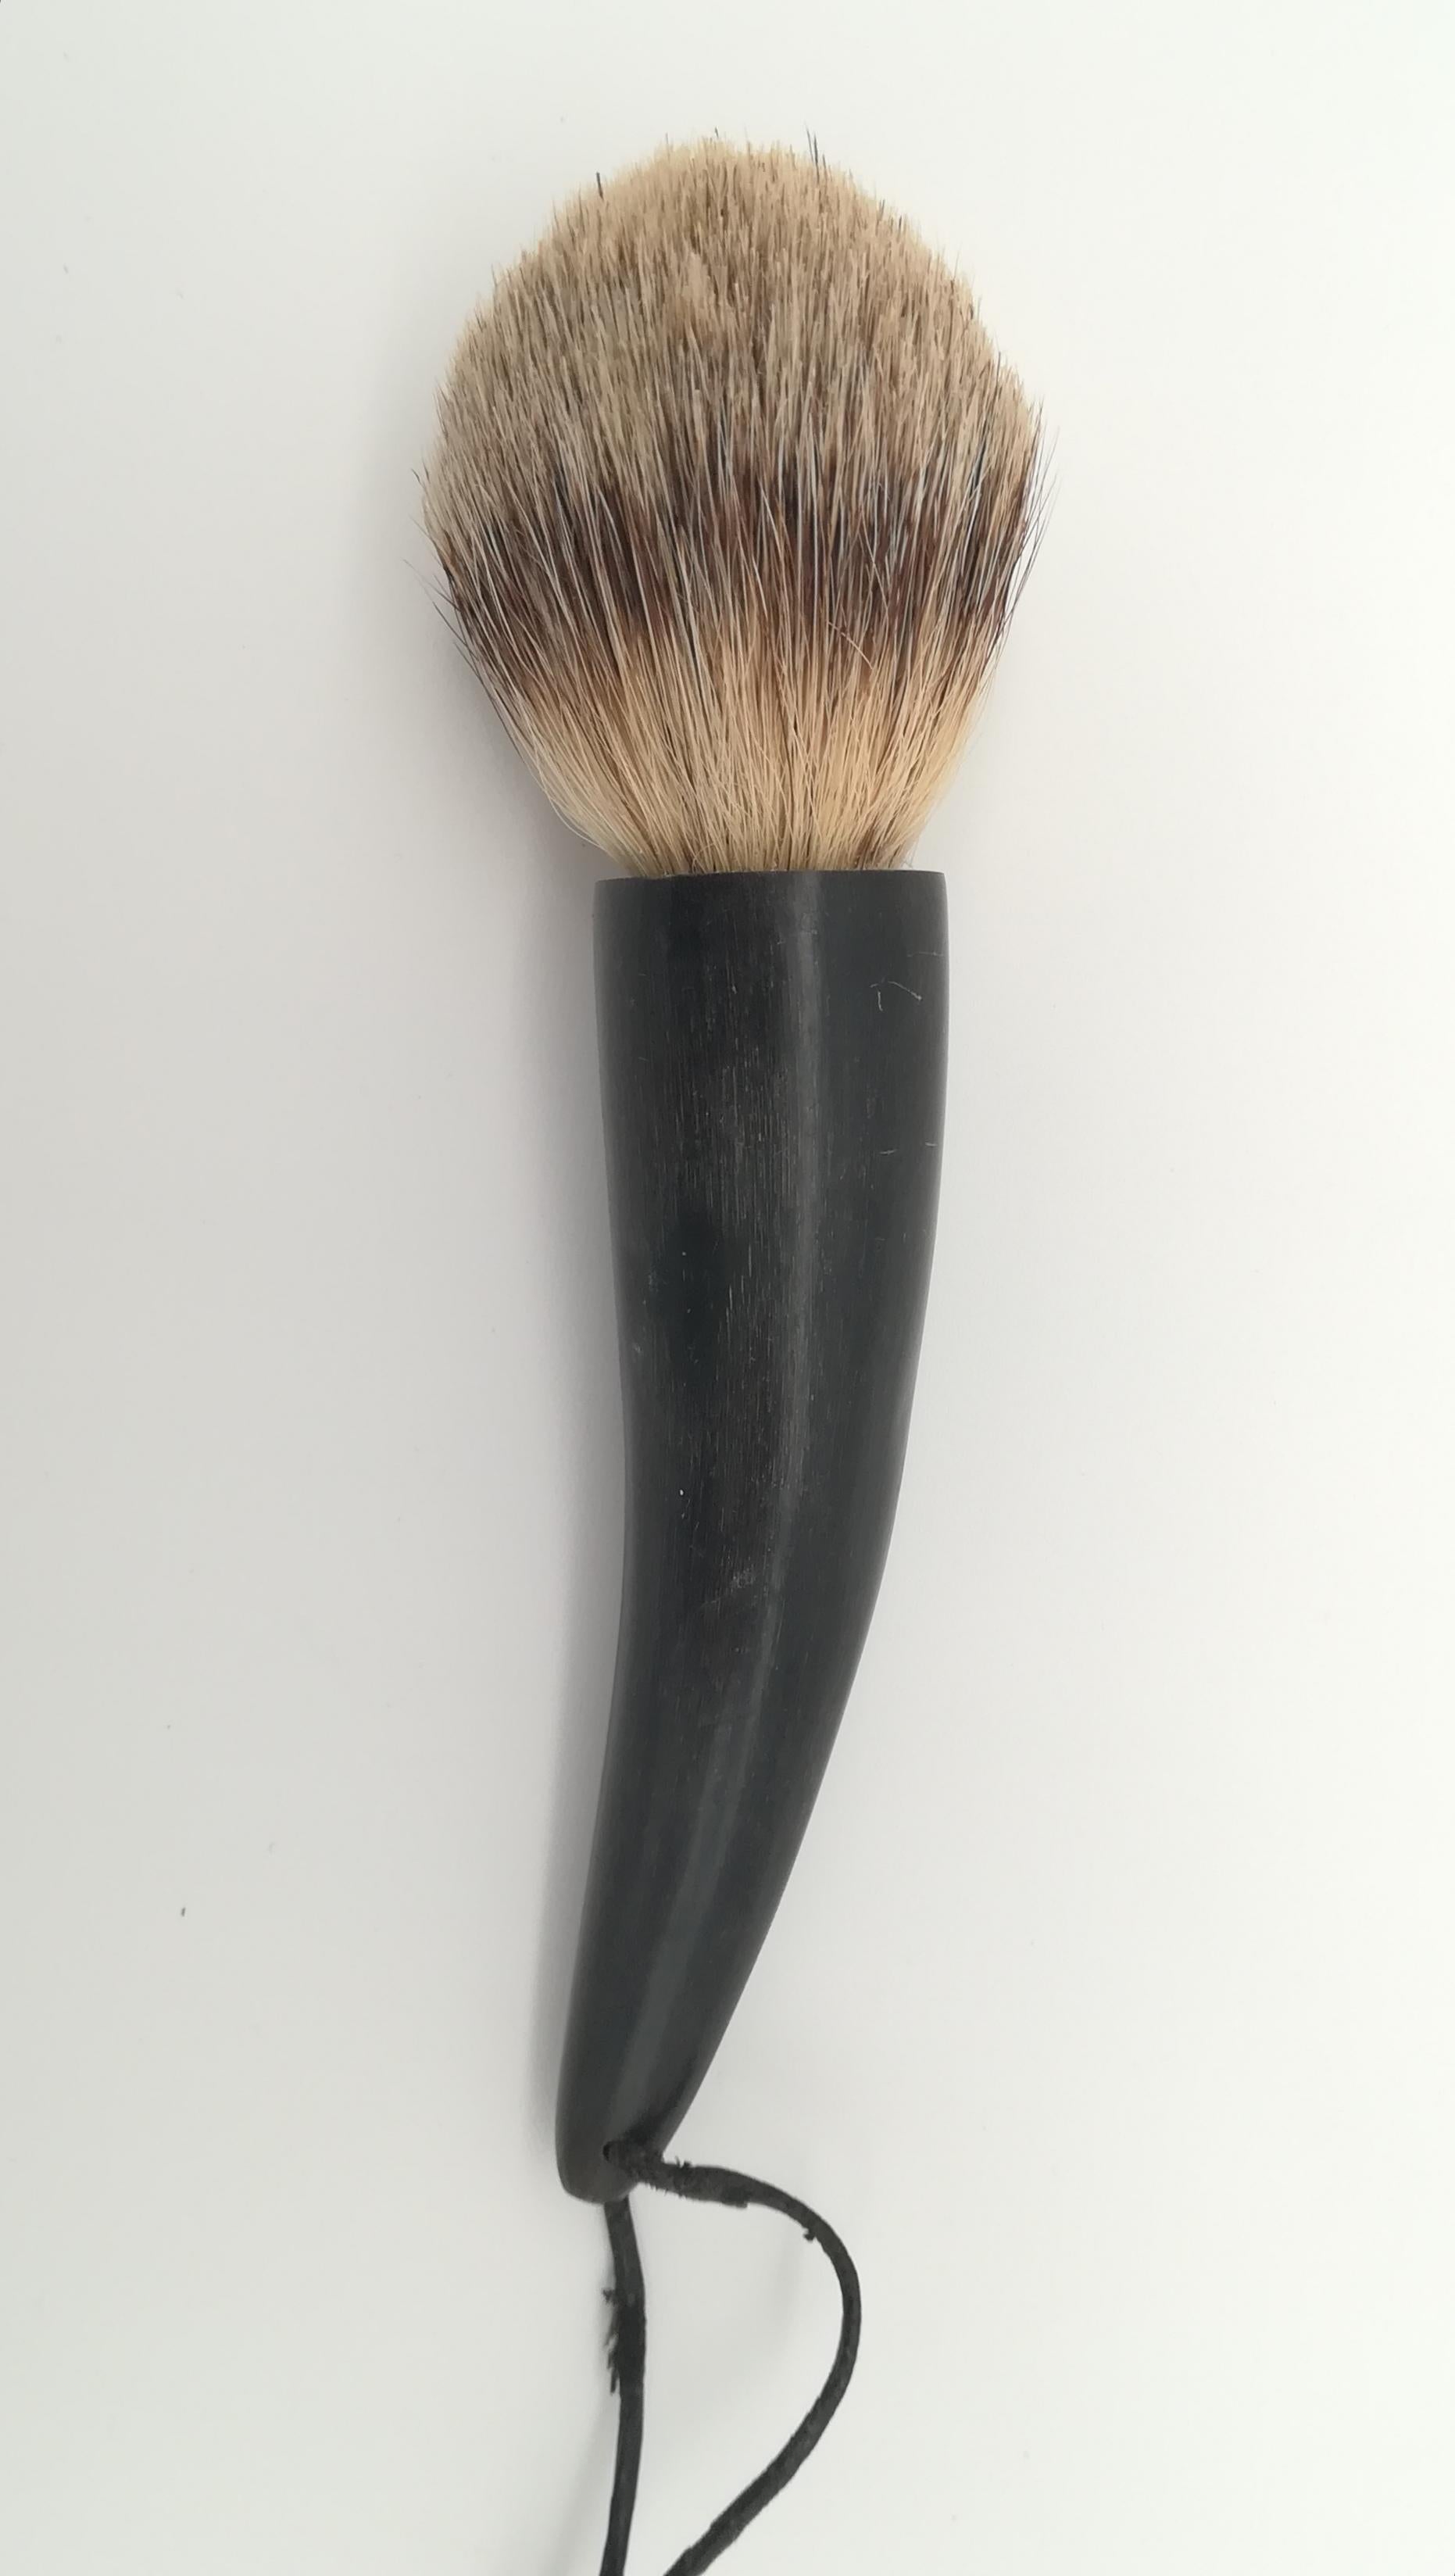 Organic water buffalo horn and badger hair shaving brush attributed to Carl Aubock. With original leather ribbon to hang it. Looks like never used. Rare Gentelmans accessory.